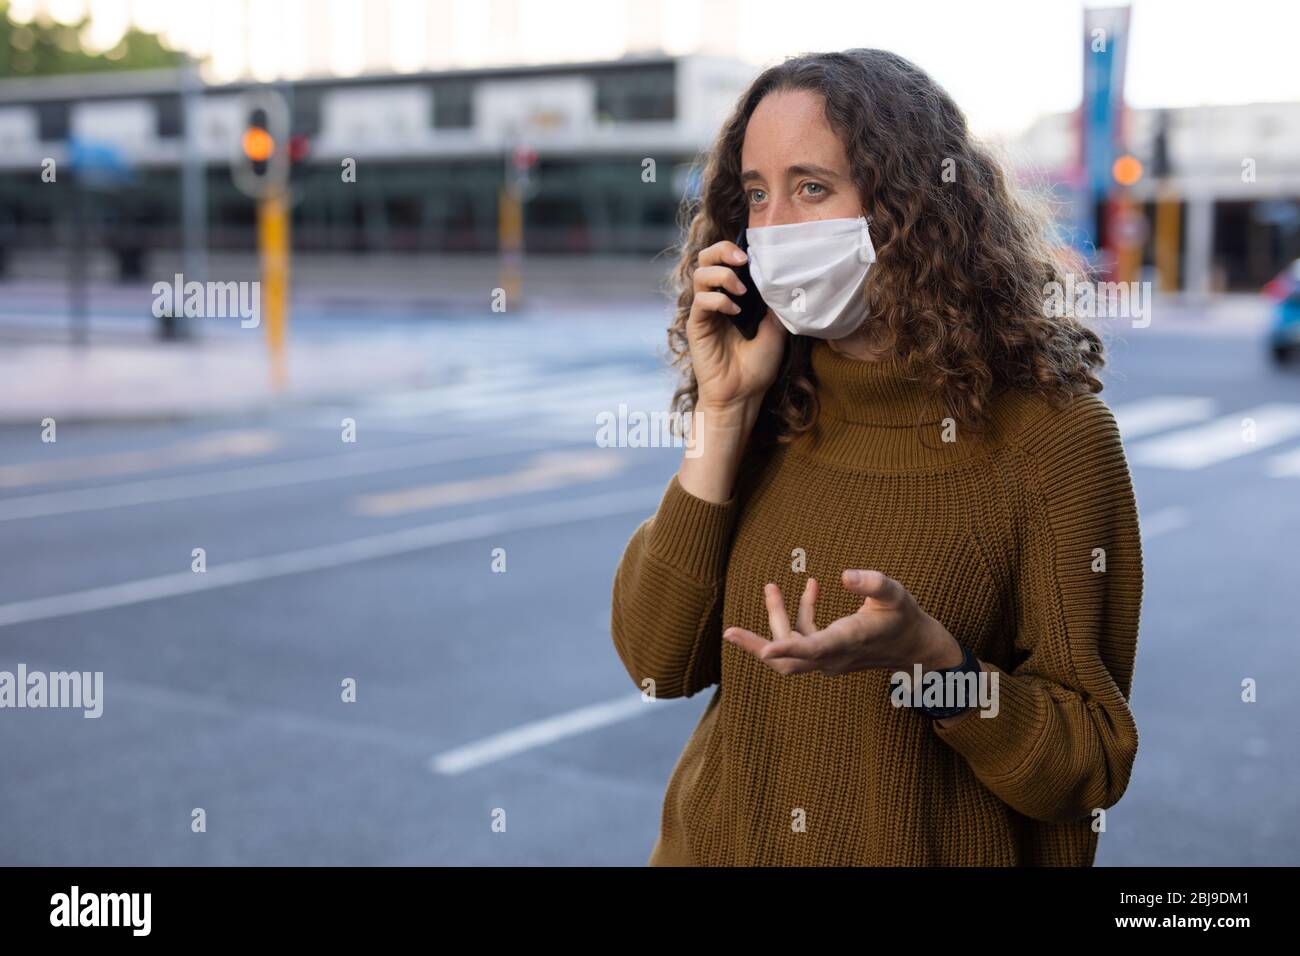 Caucasian woman wearing a protective mask and using her phone in the streets Stock Photo